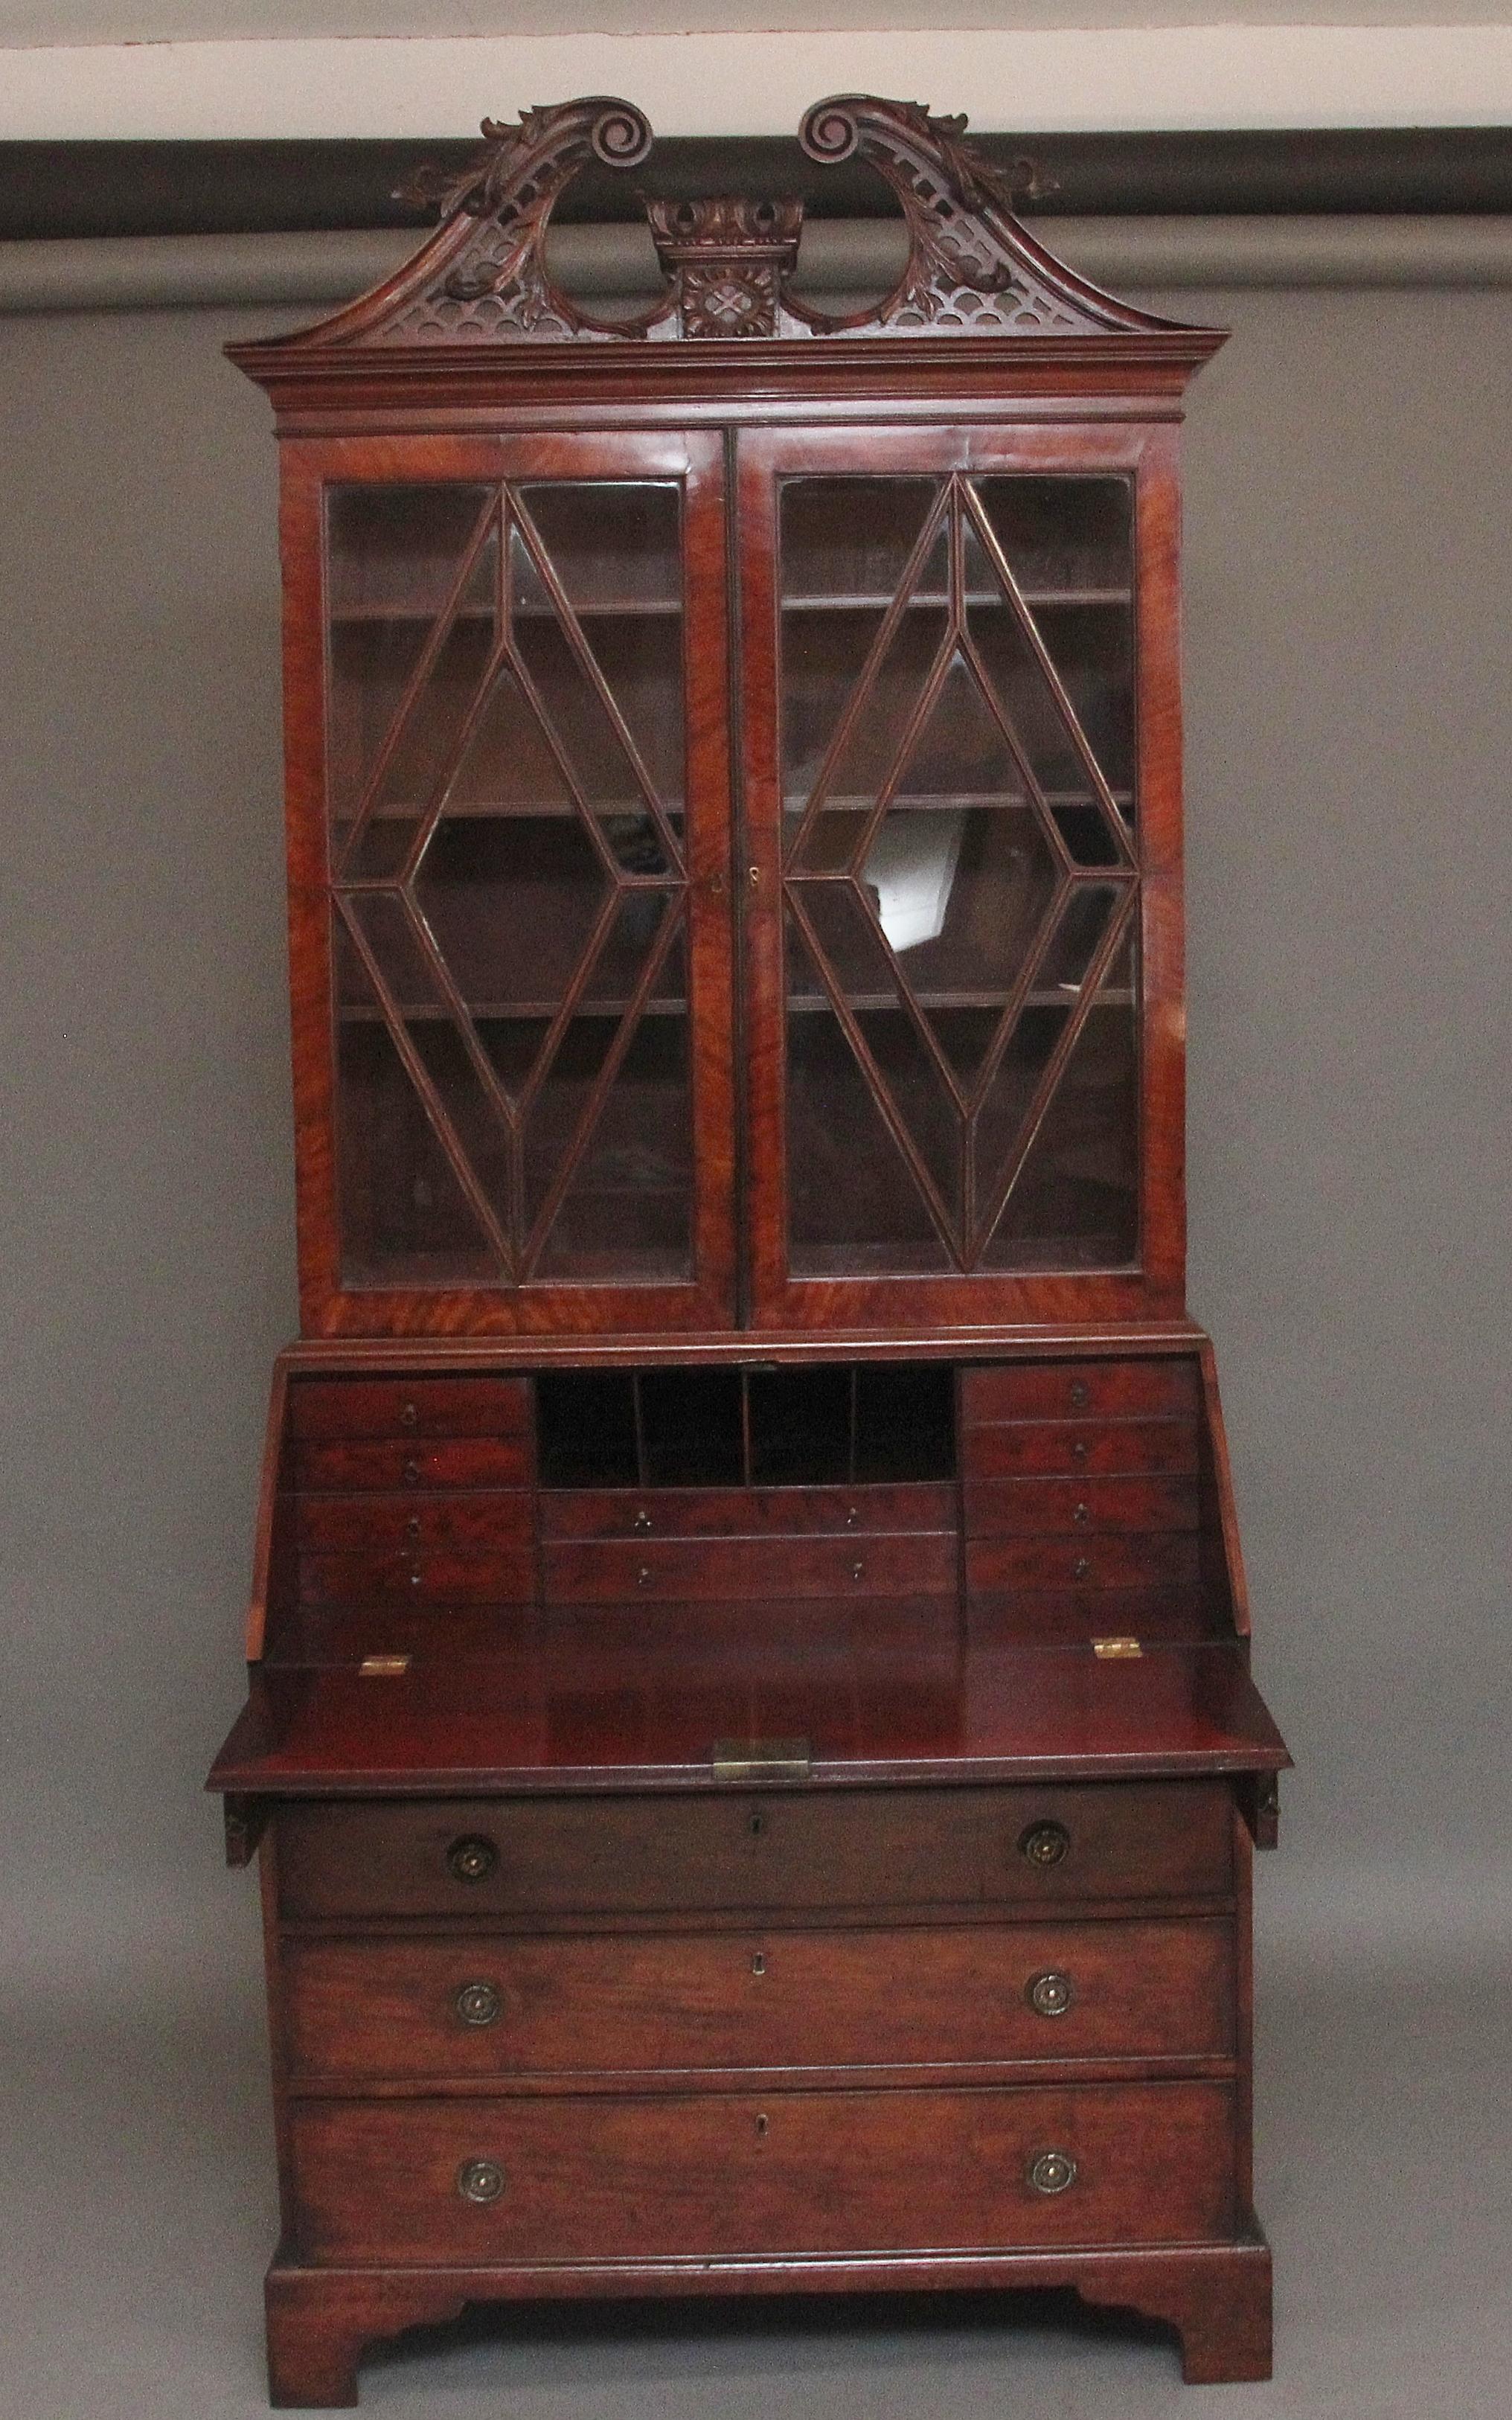 A lovely quality early 19th Century mahogany bureau bookcase with later (Edwardian) cornice, the highly decorative carved pierced fret swan neck pediment with a central box column with further carved floral decoration, the top section having two